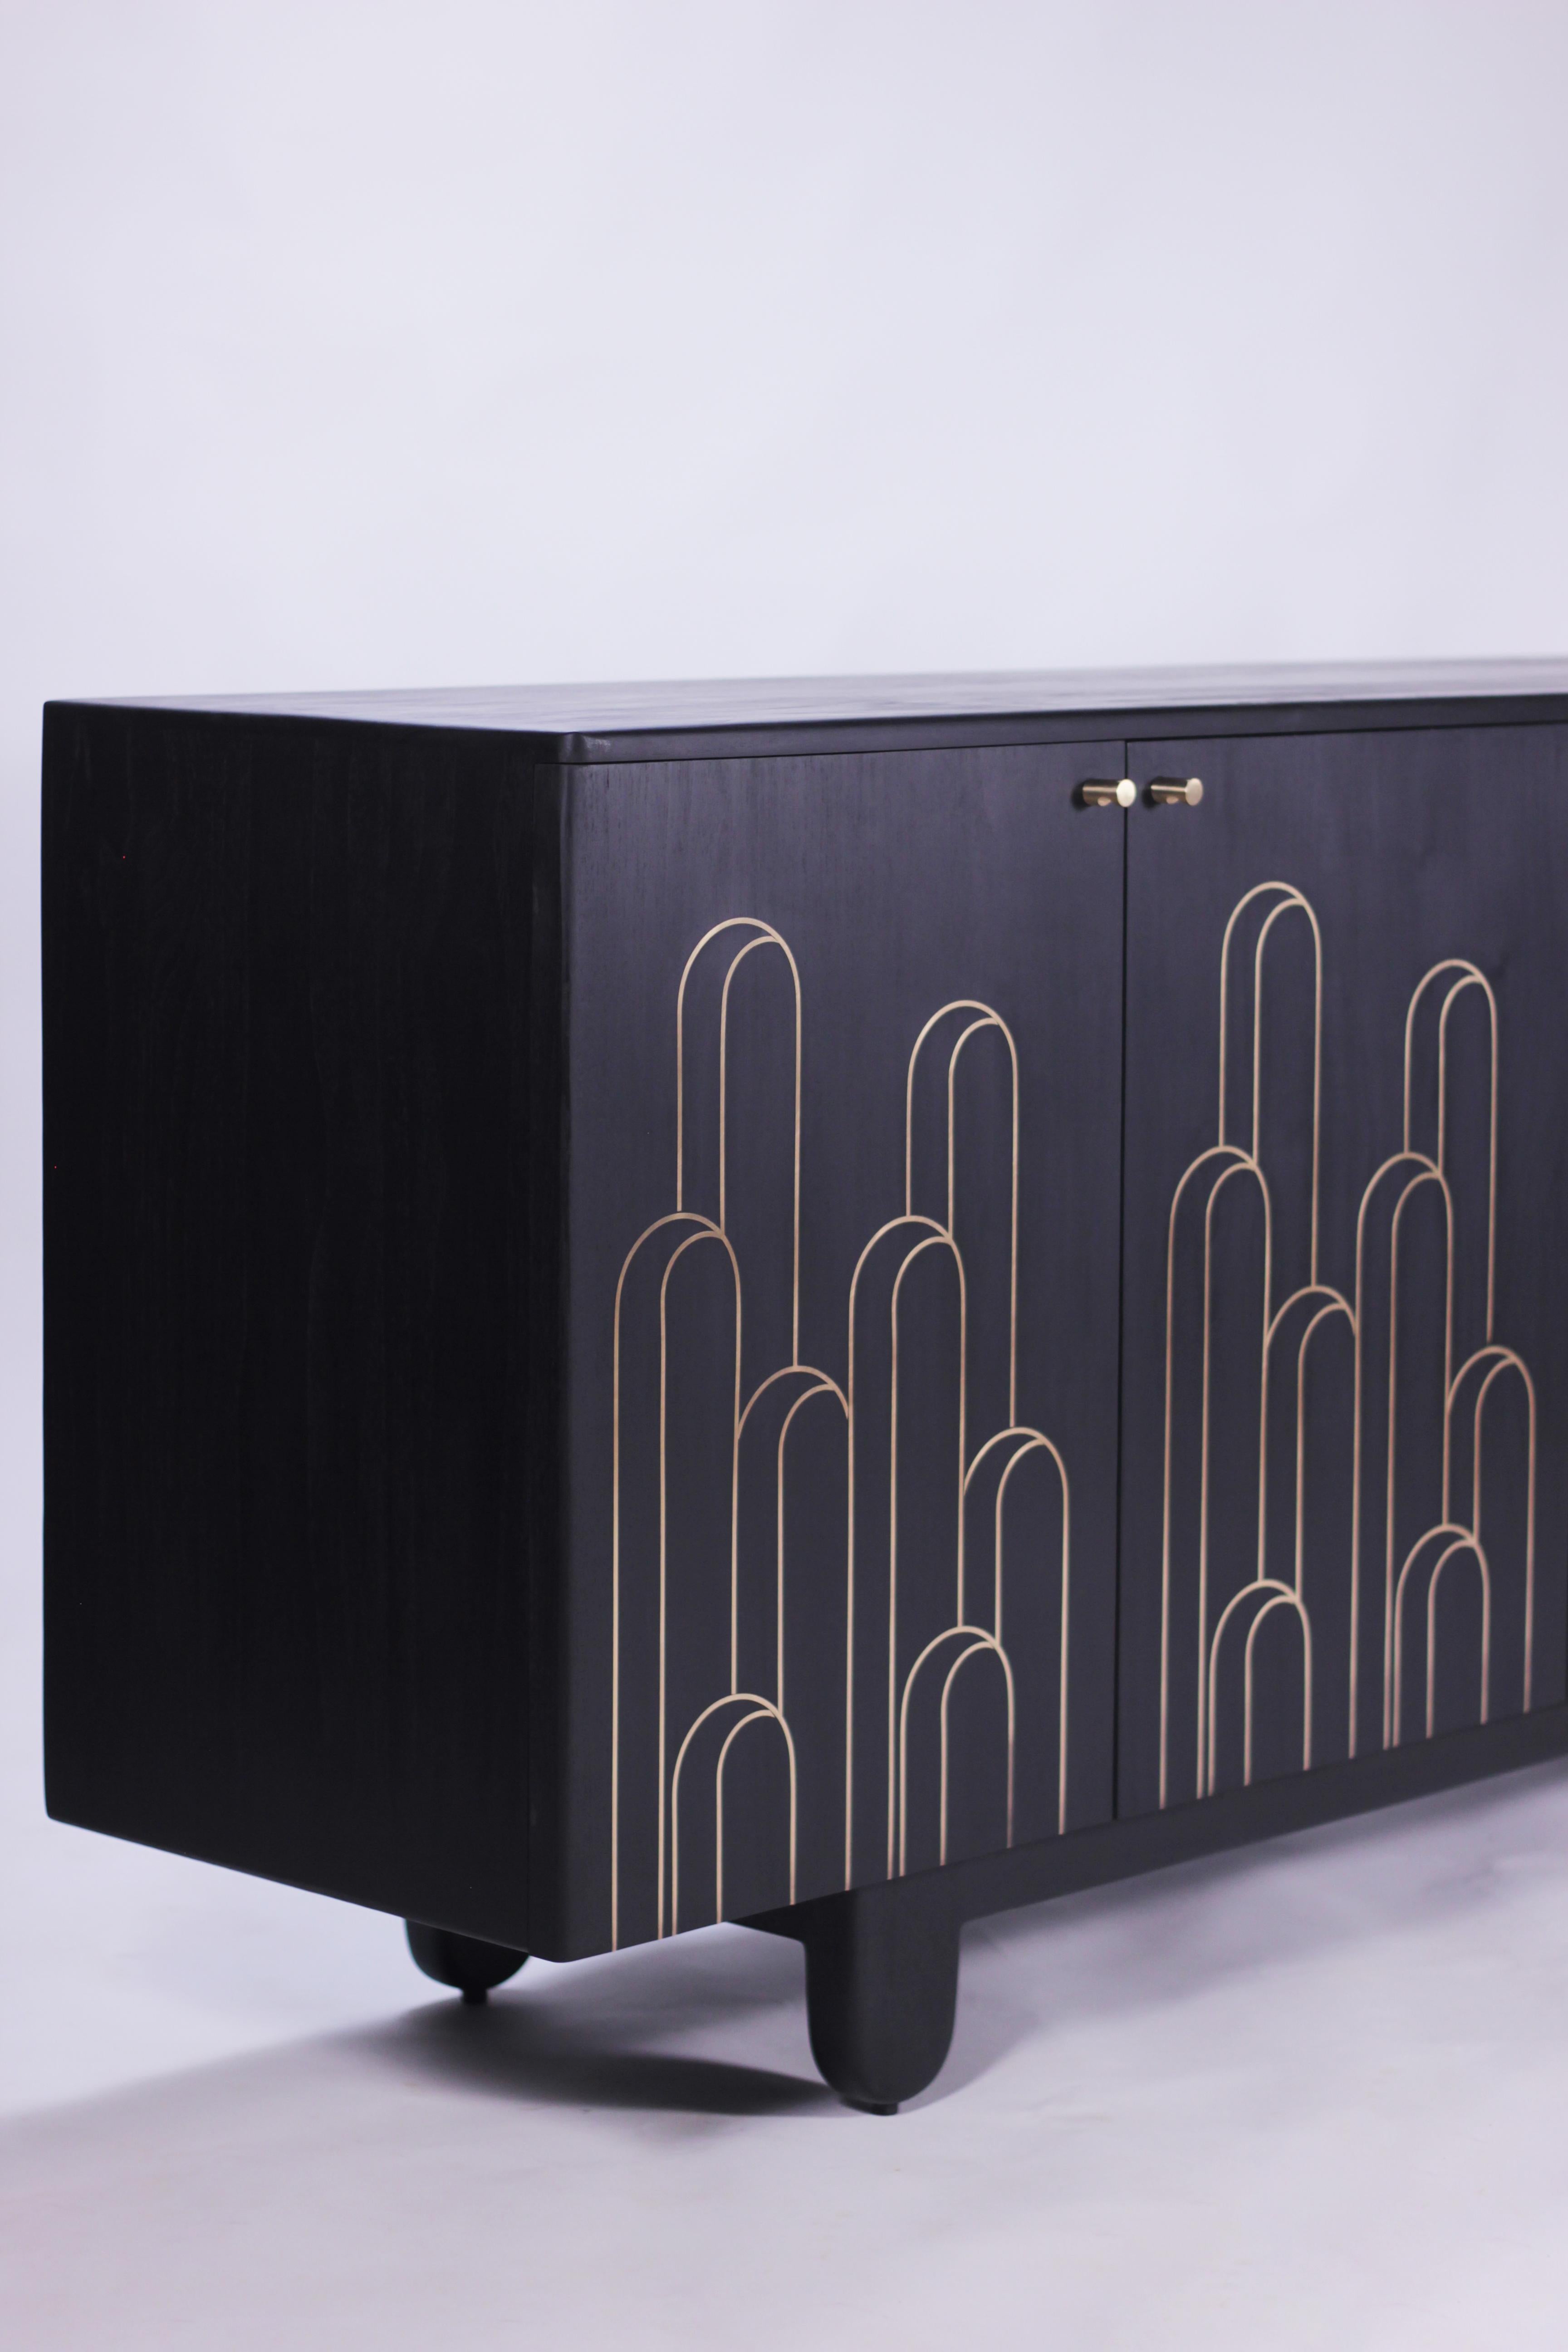 The Scallop credenza is a stunning Art Deco inspired design that celebrates the elegance of form, value of materials and decadent details. Combining craftsmanship and modern sensibilities in design, the cabinet’s fabulous exterior is methodically